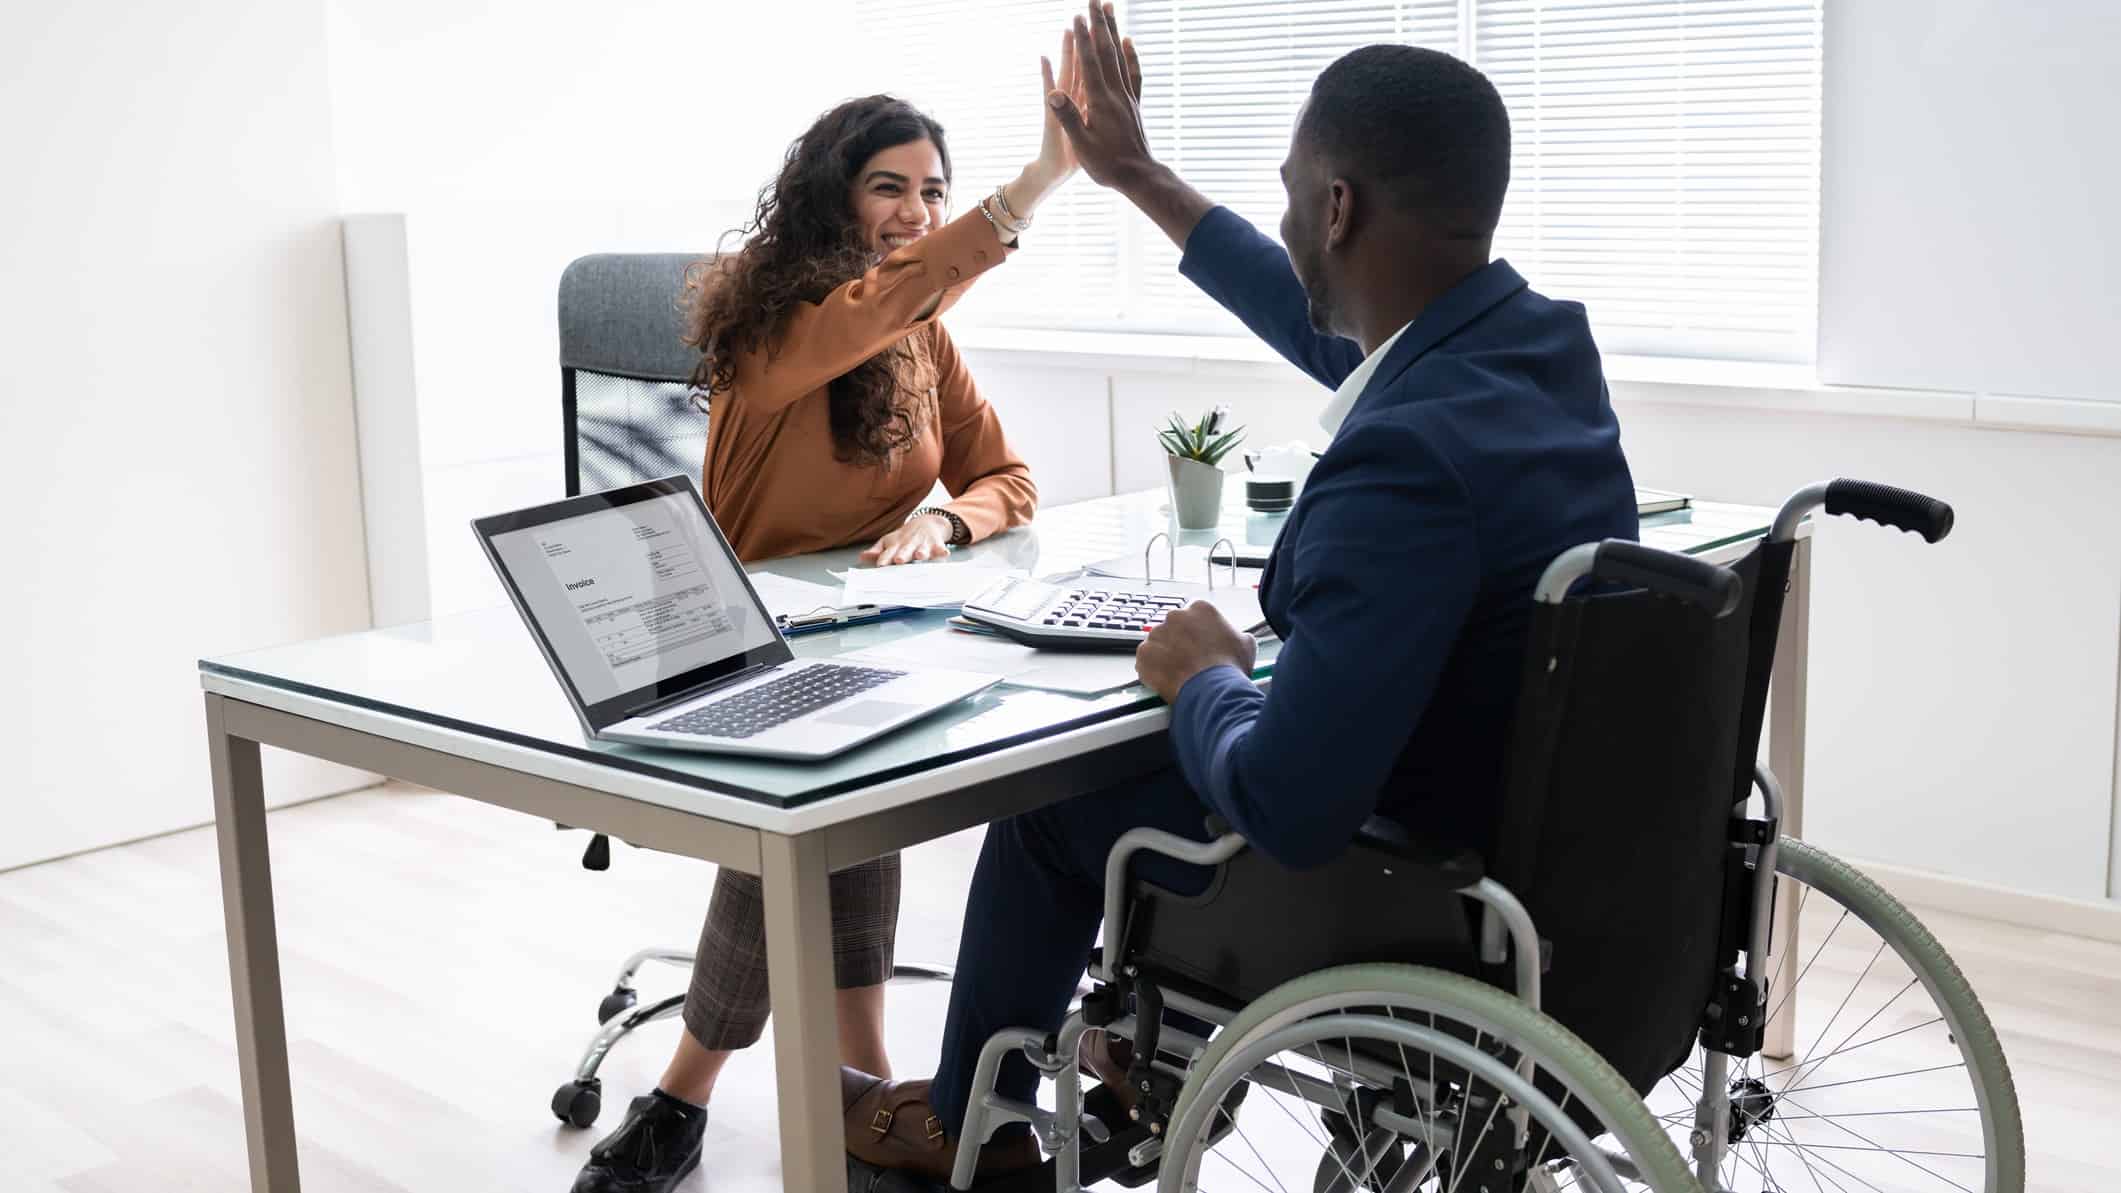 A woman and a man in a wheelchair celebrate new business with a high-five across the desk